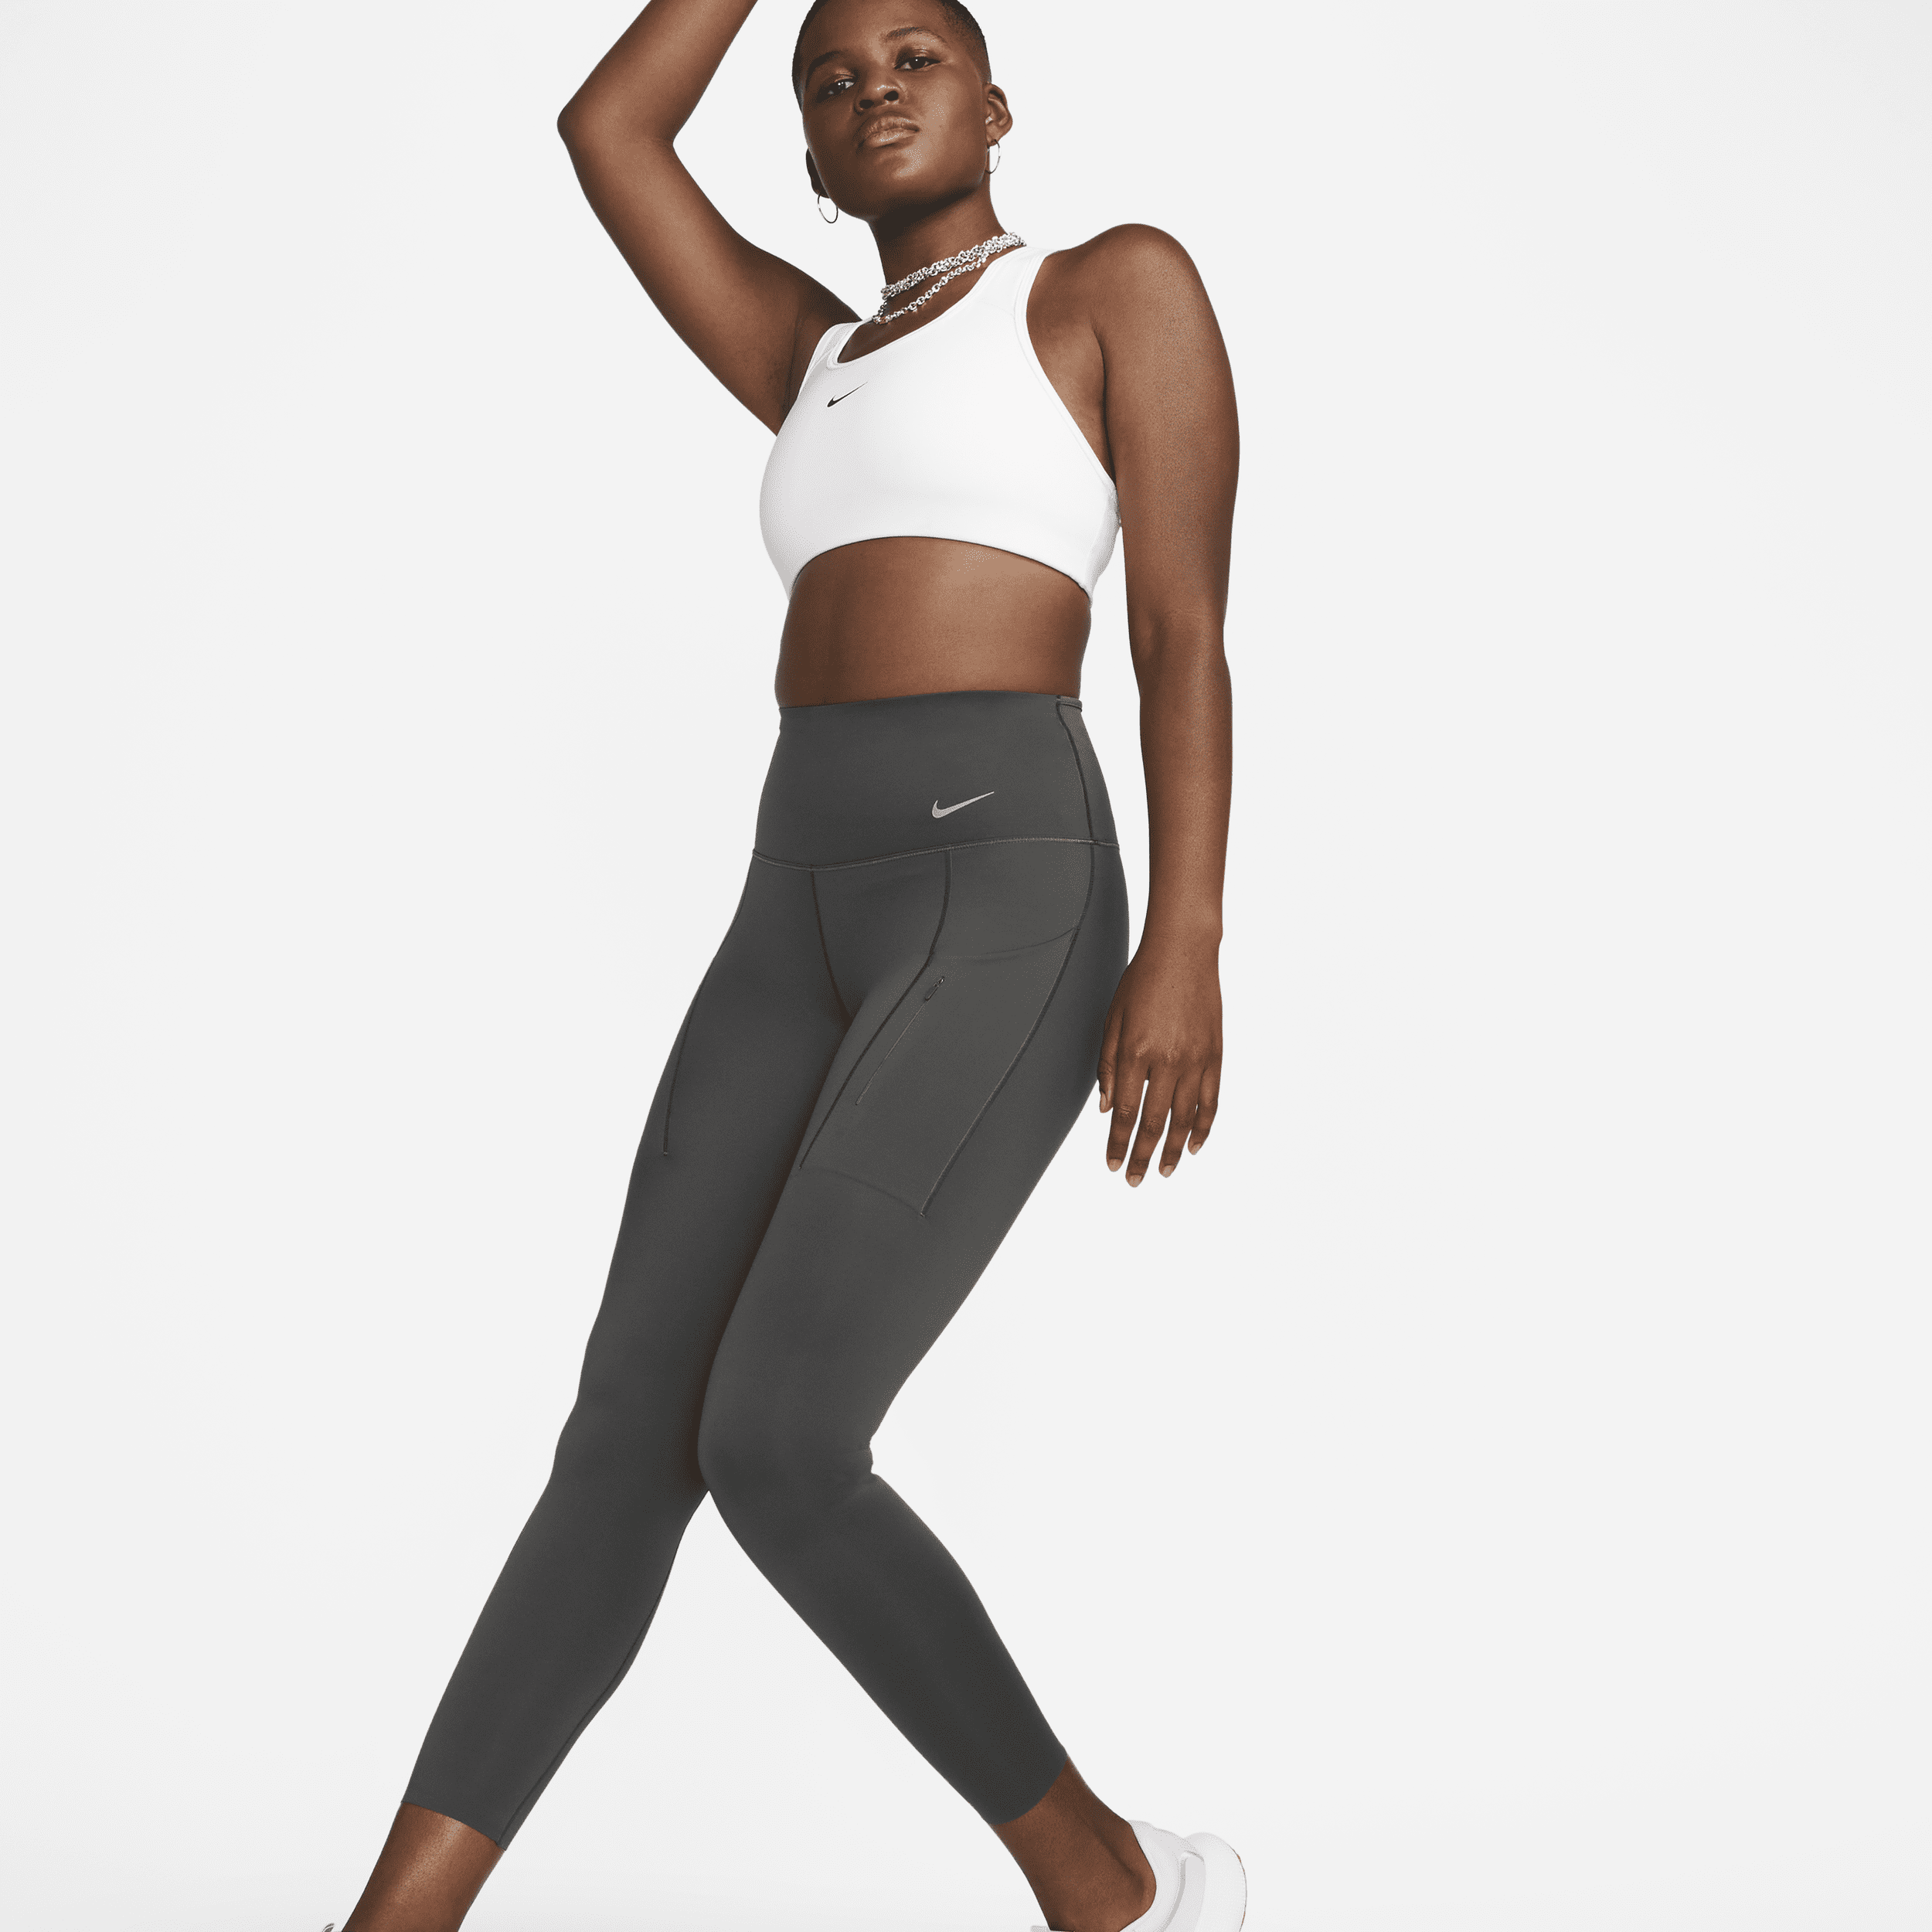 Nike Go Women's Firm-Support High-Waisted 7/8 Leggings with Pockets - Blue, DQ5636-430